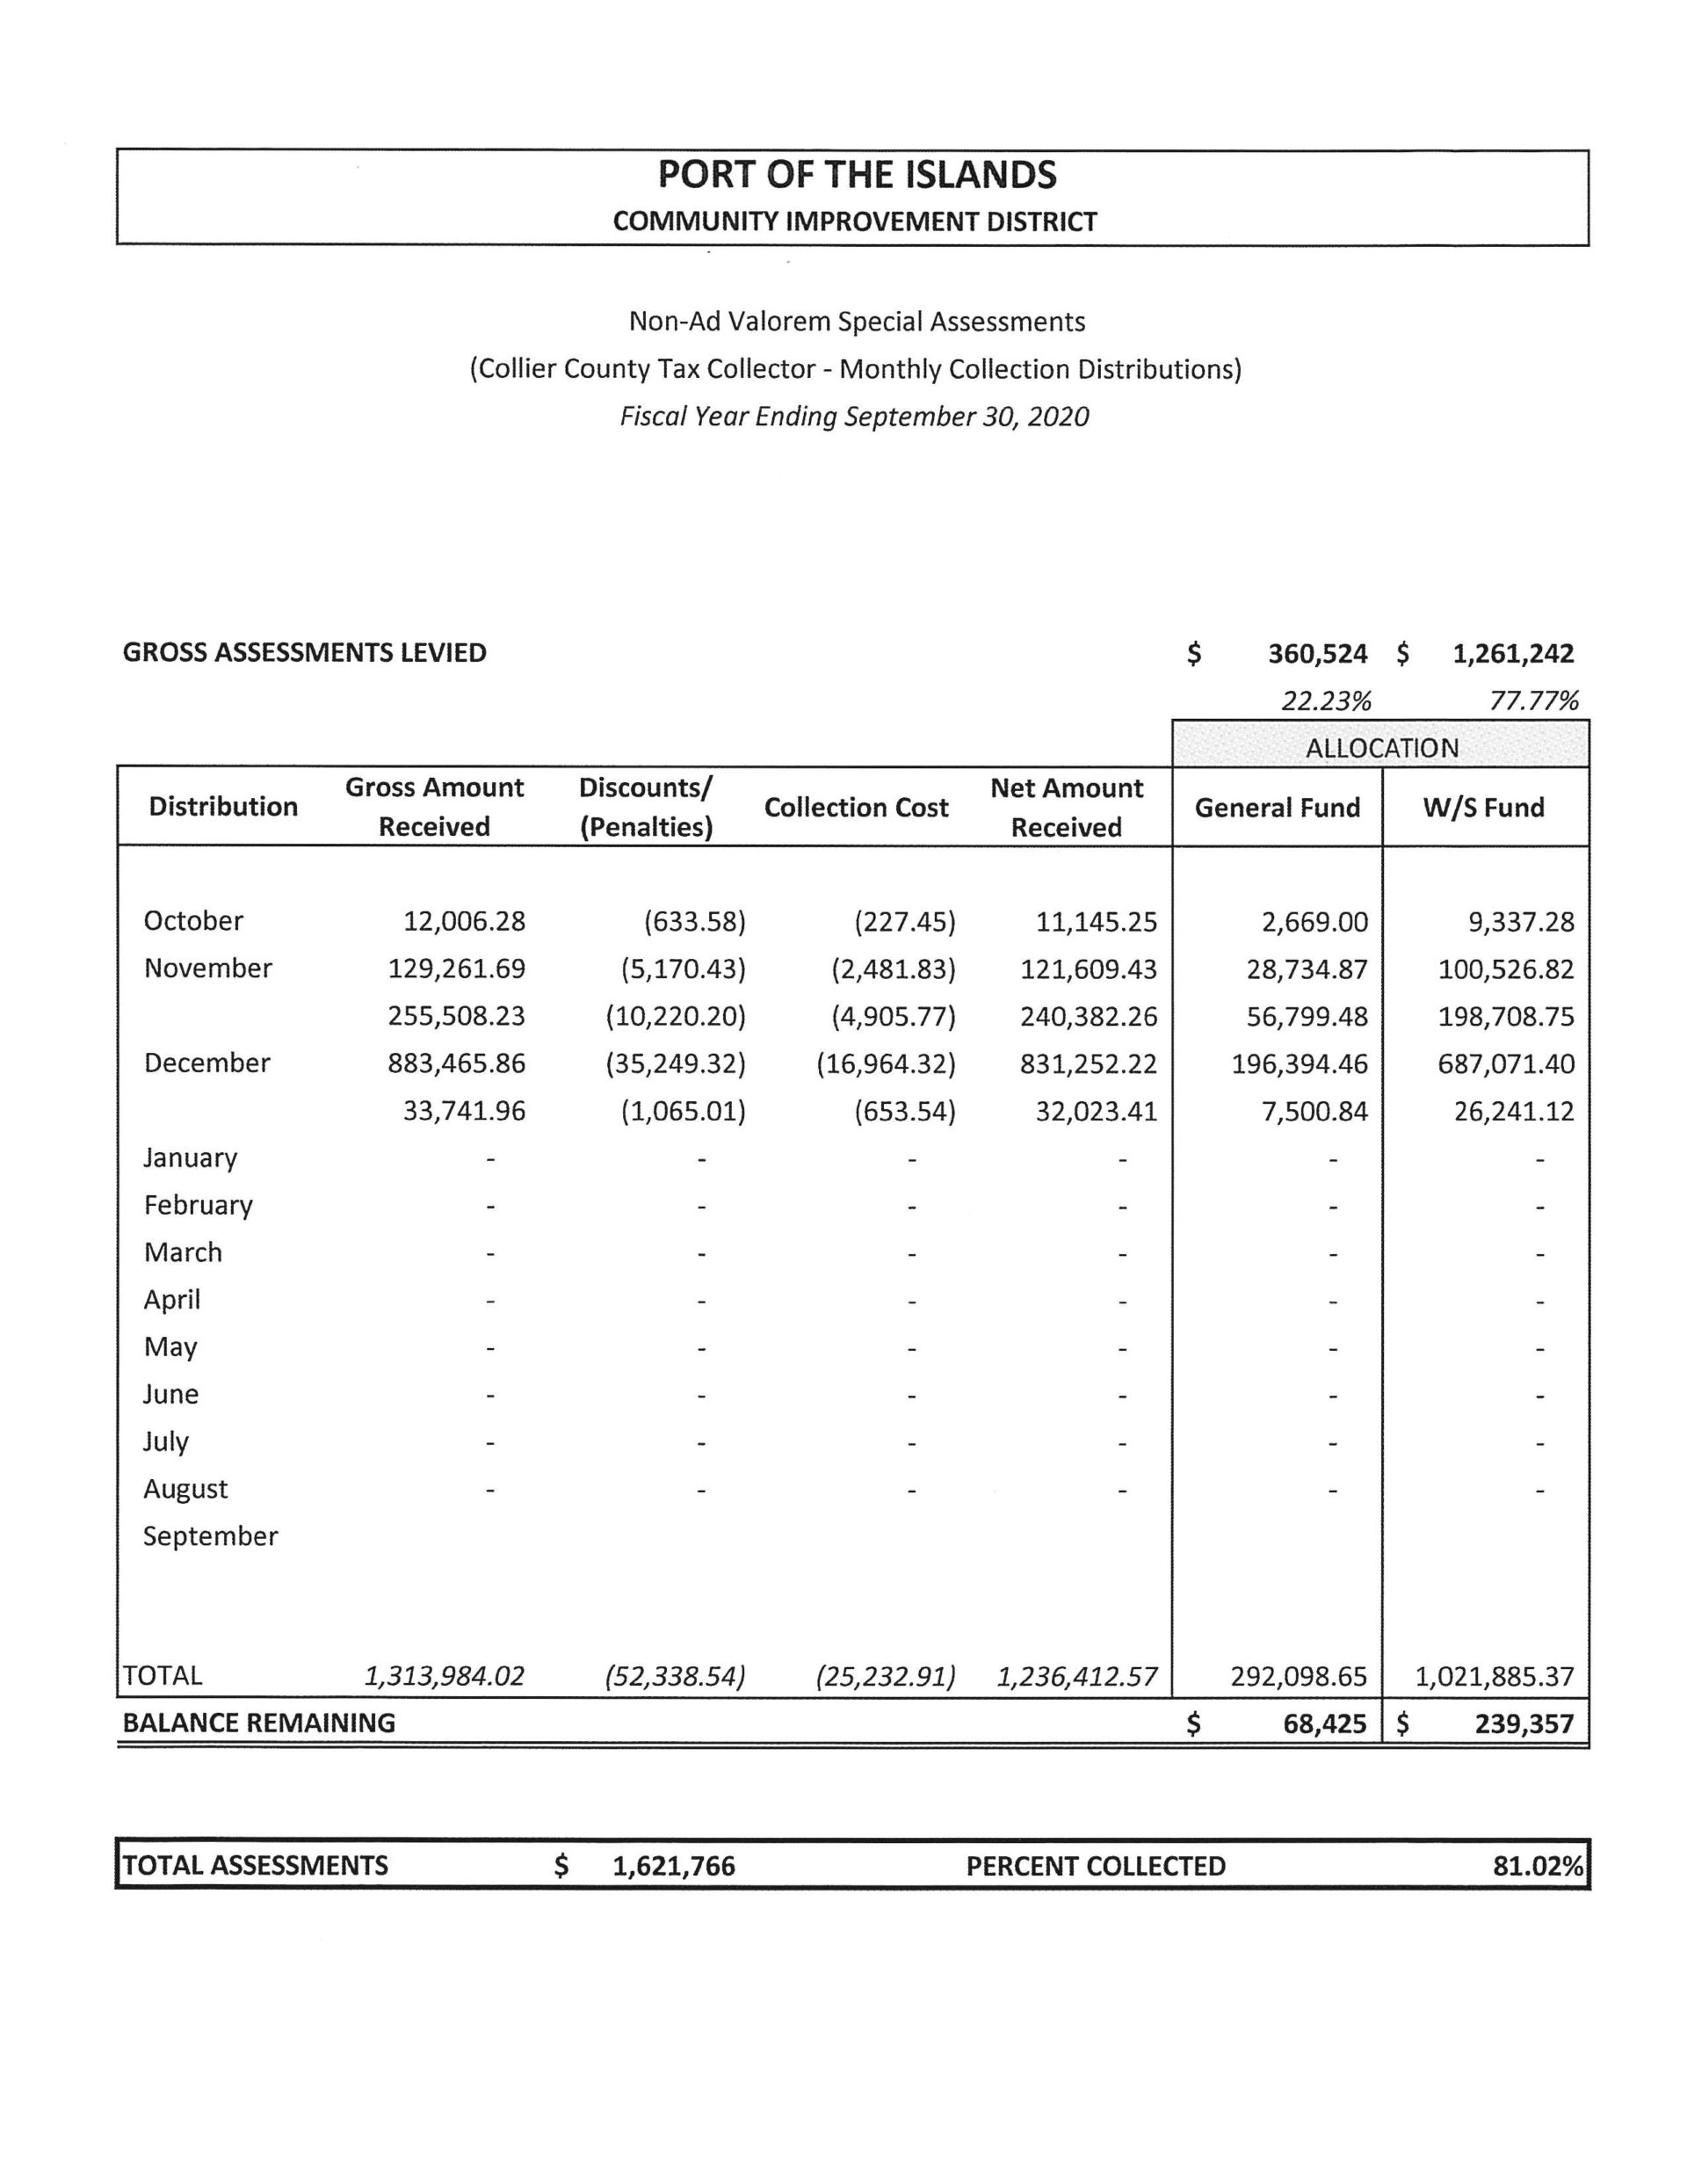 Port of the Islands Financial Report - December 2019 Assessment Collection Report